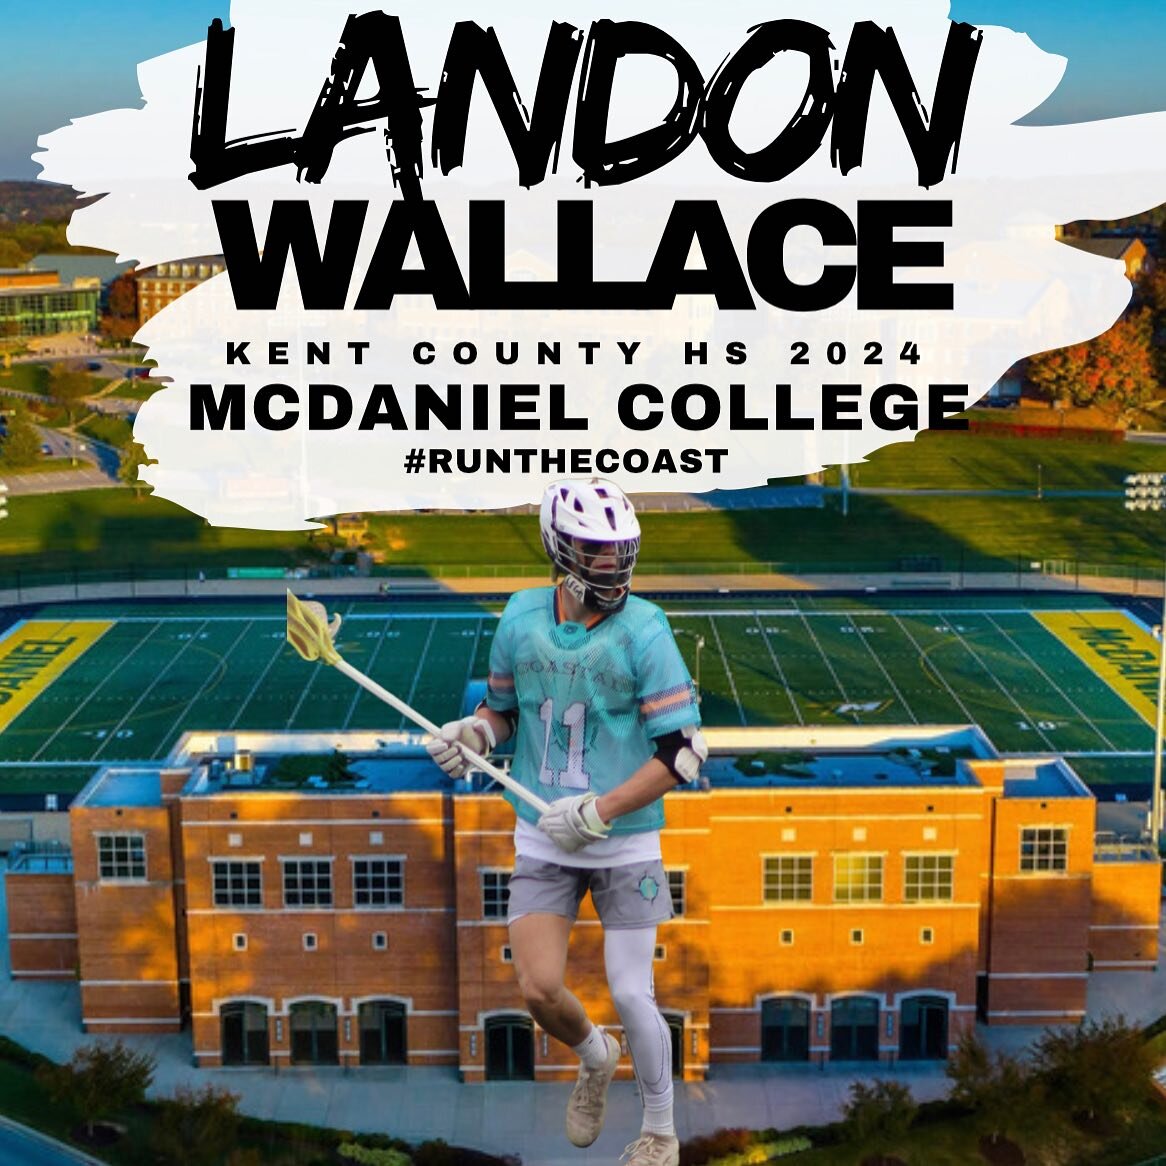 Congratulations to Landon Wallace on his commitment to McDaniel college! He&rsquo;s a tremendous athlete and I&rsquo;m sure he&rsquo;s going to make a huge impact! Good luck!🔱🥍🧡
#RunTheCoast #GoneCoastal